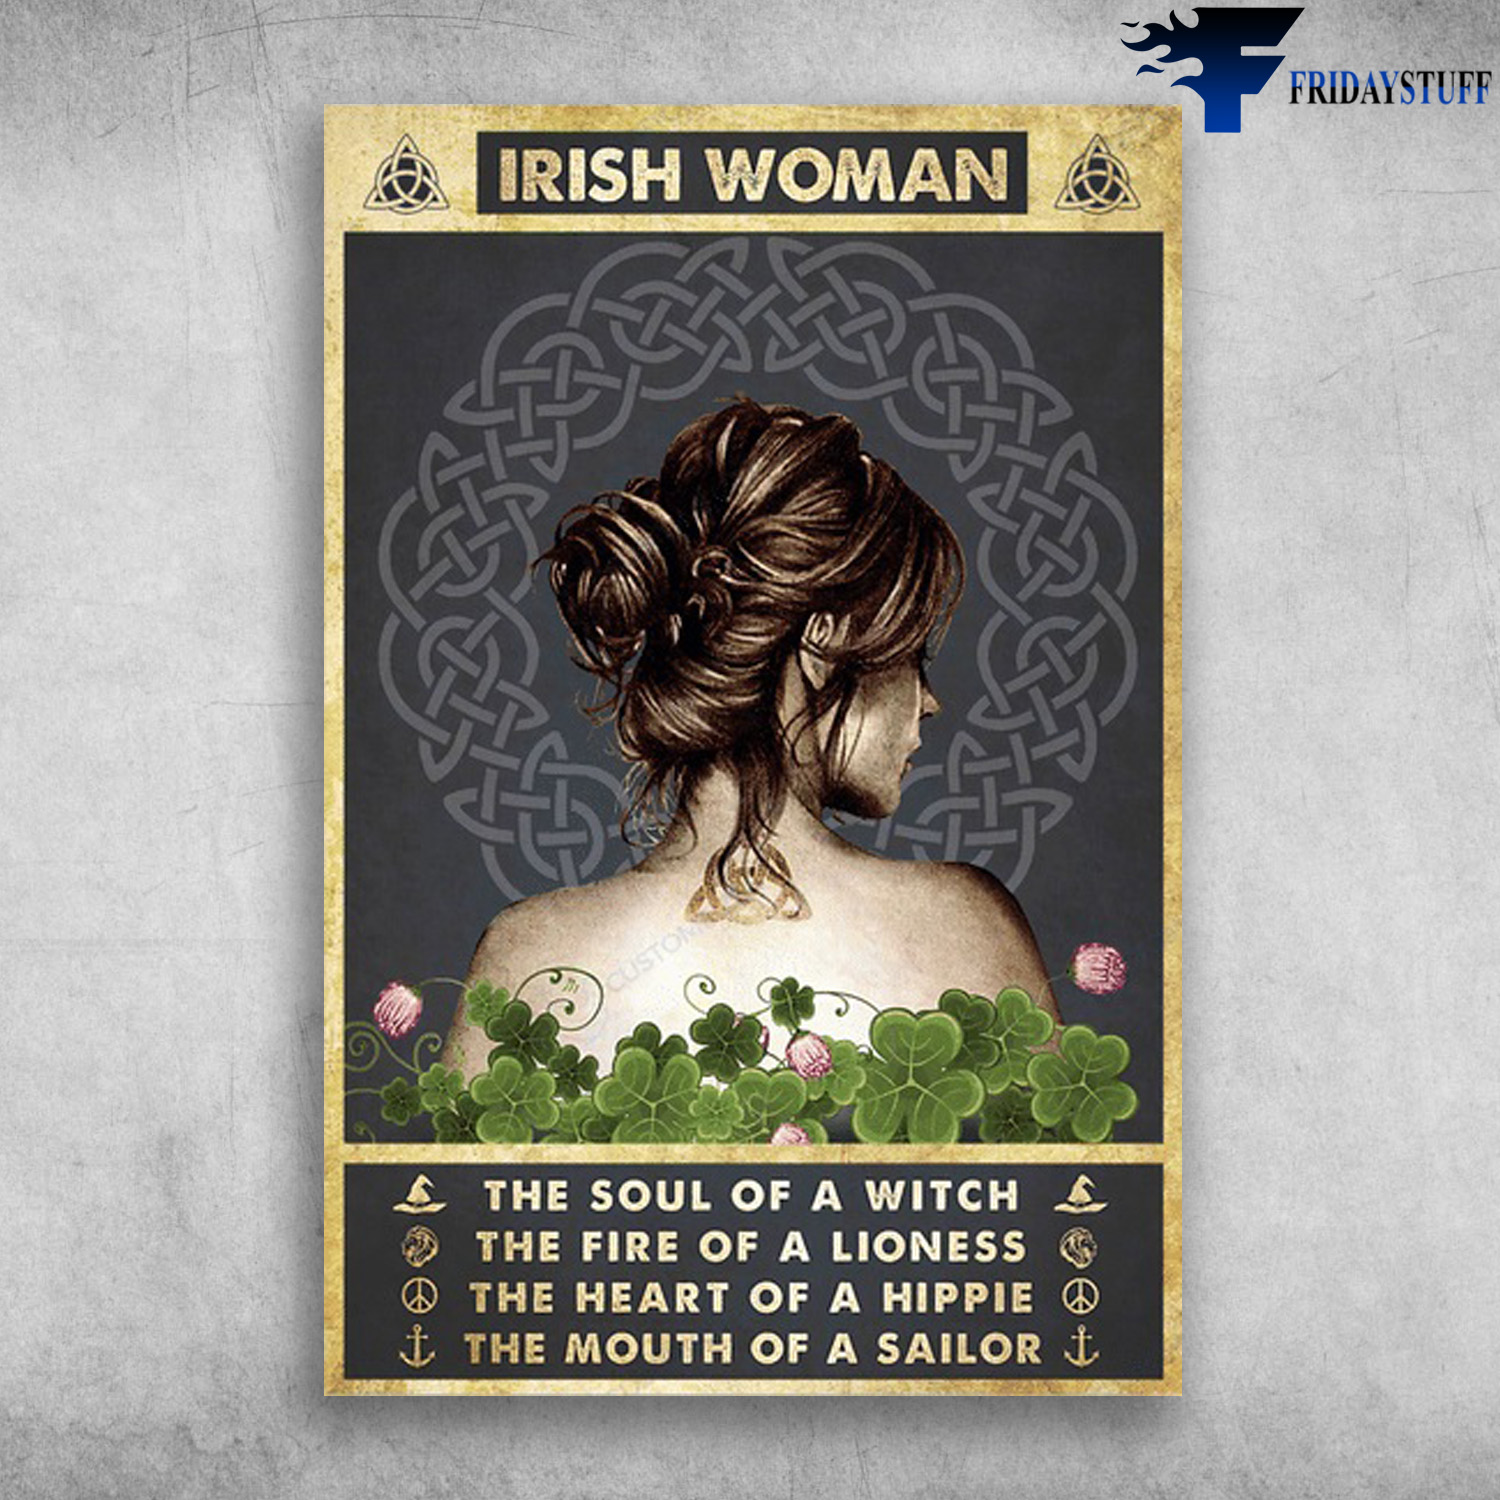 Irish Woman - The Soul Of A Witch, The Fire Of A Lioness, The Heart Of A Hippie, The Mouth Of A Sailor